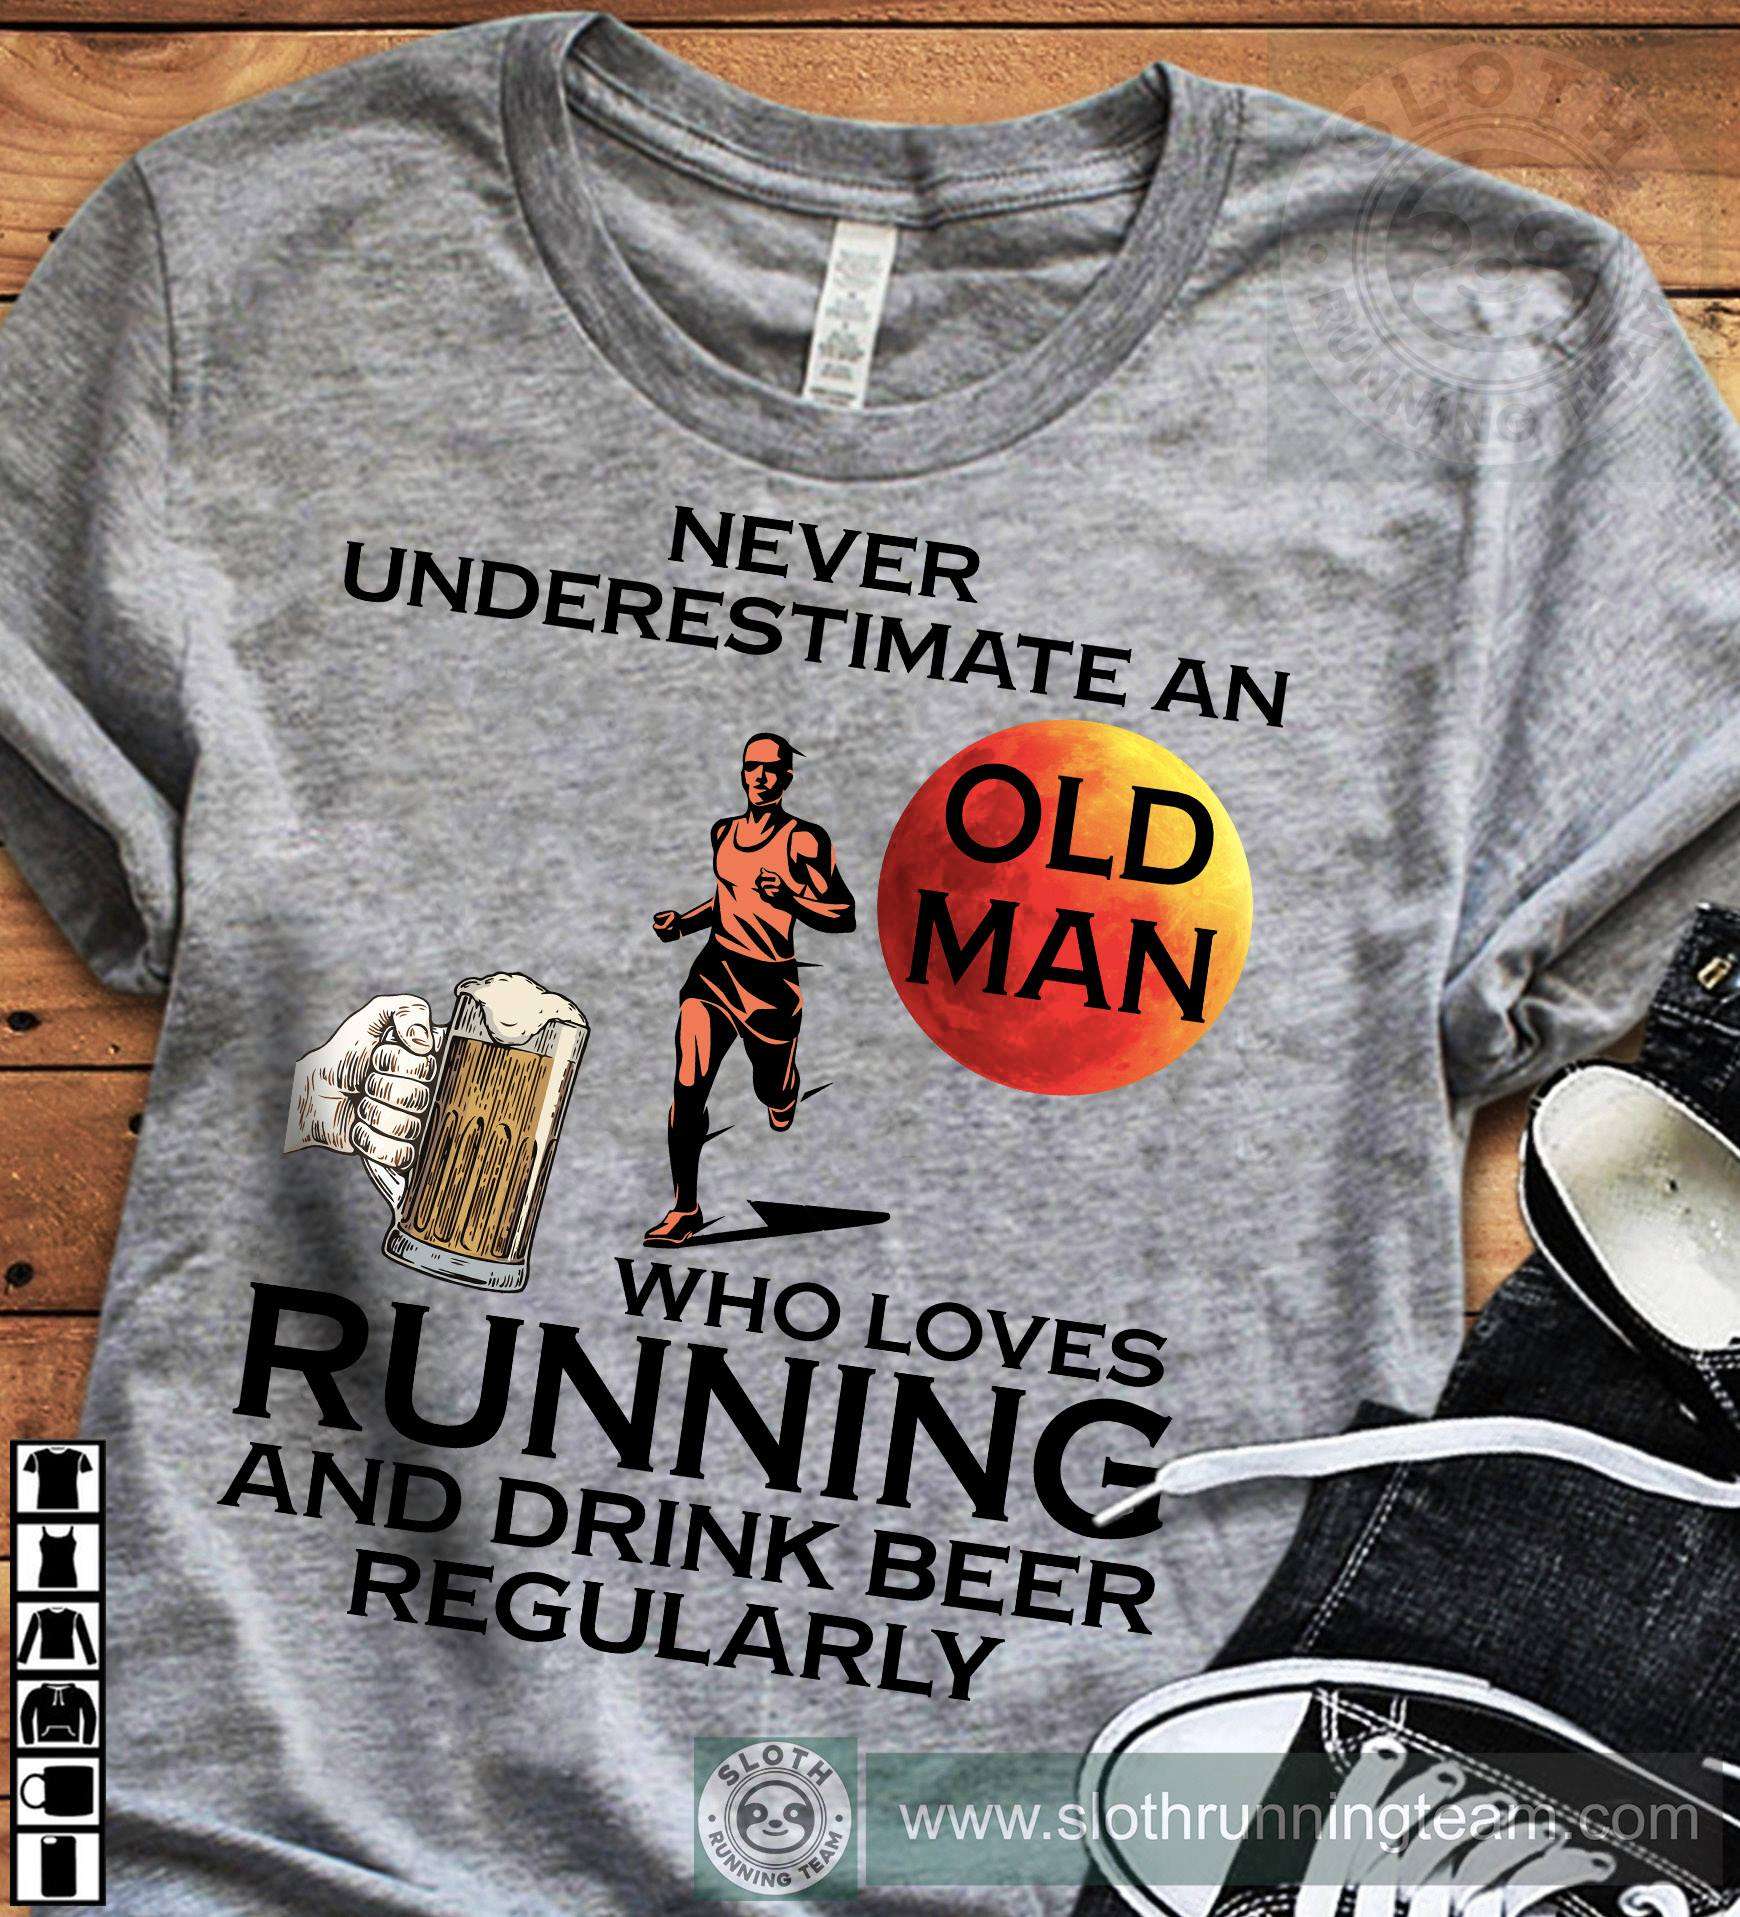 Beer And Running Man - Never underestimare old man who loves running and drink beer regularly